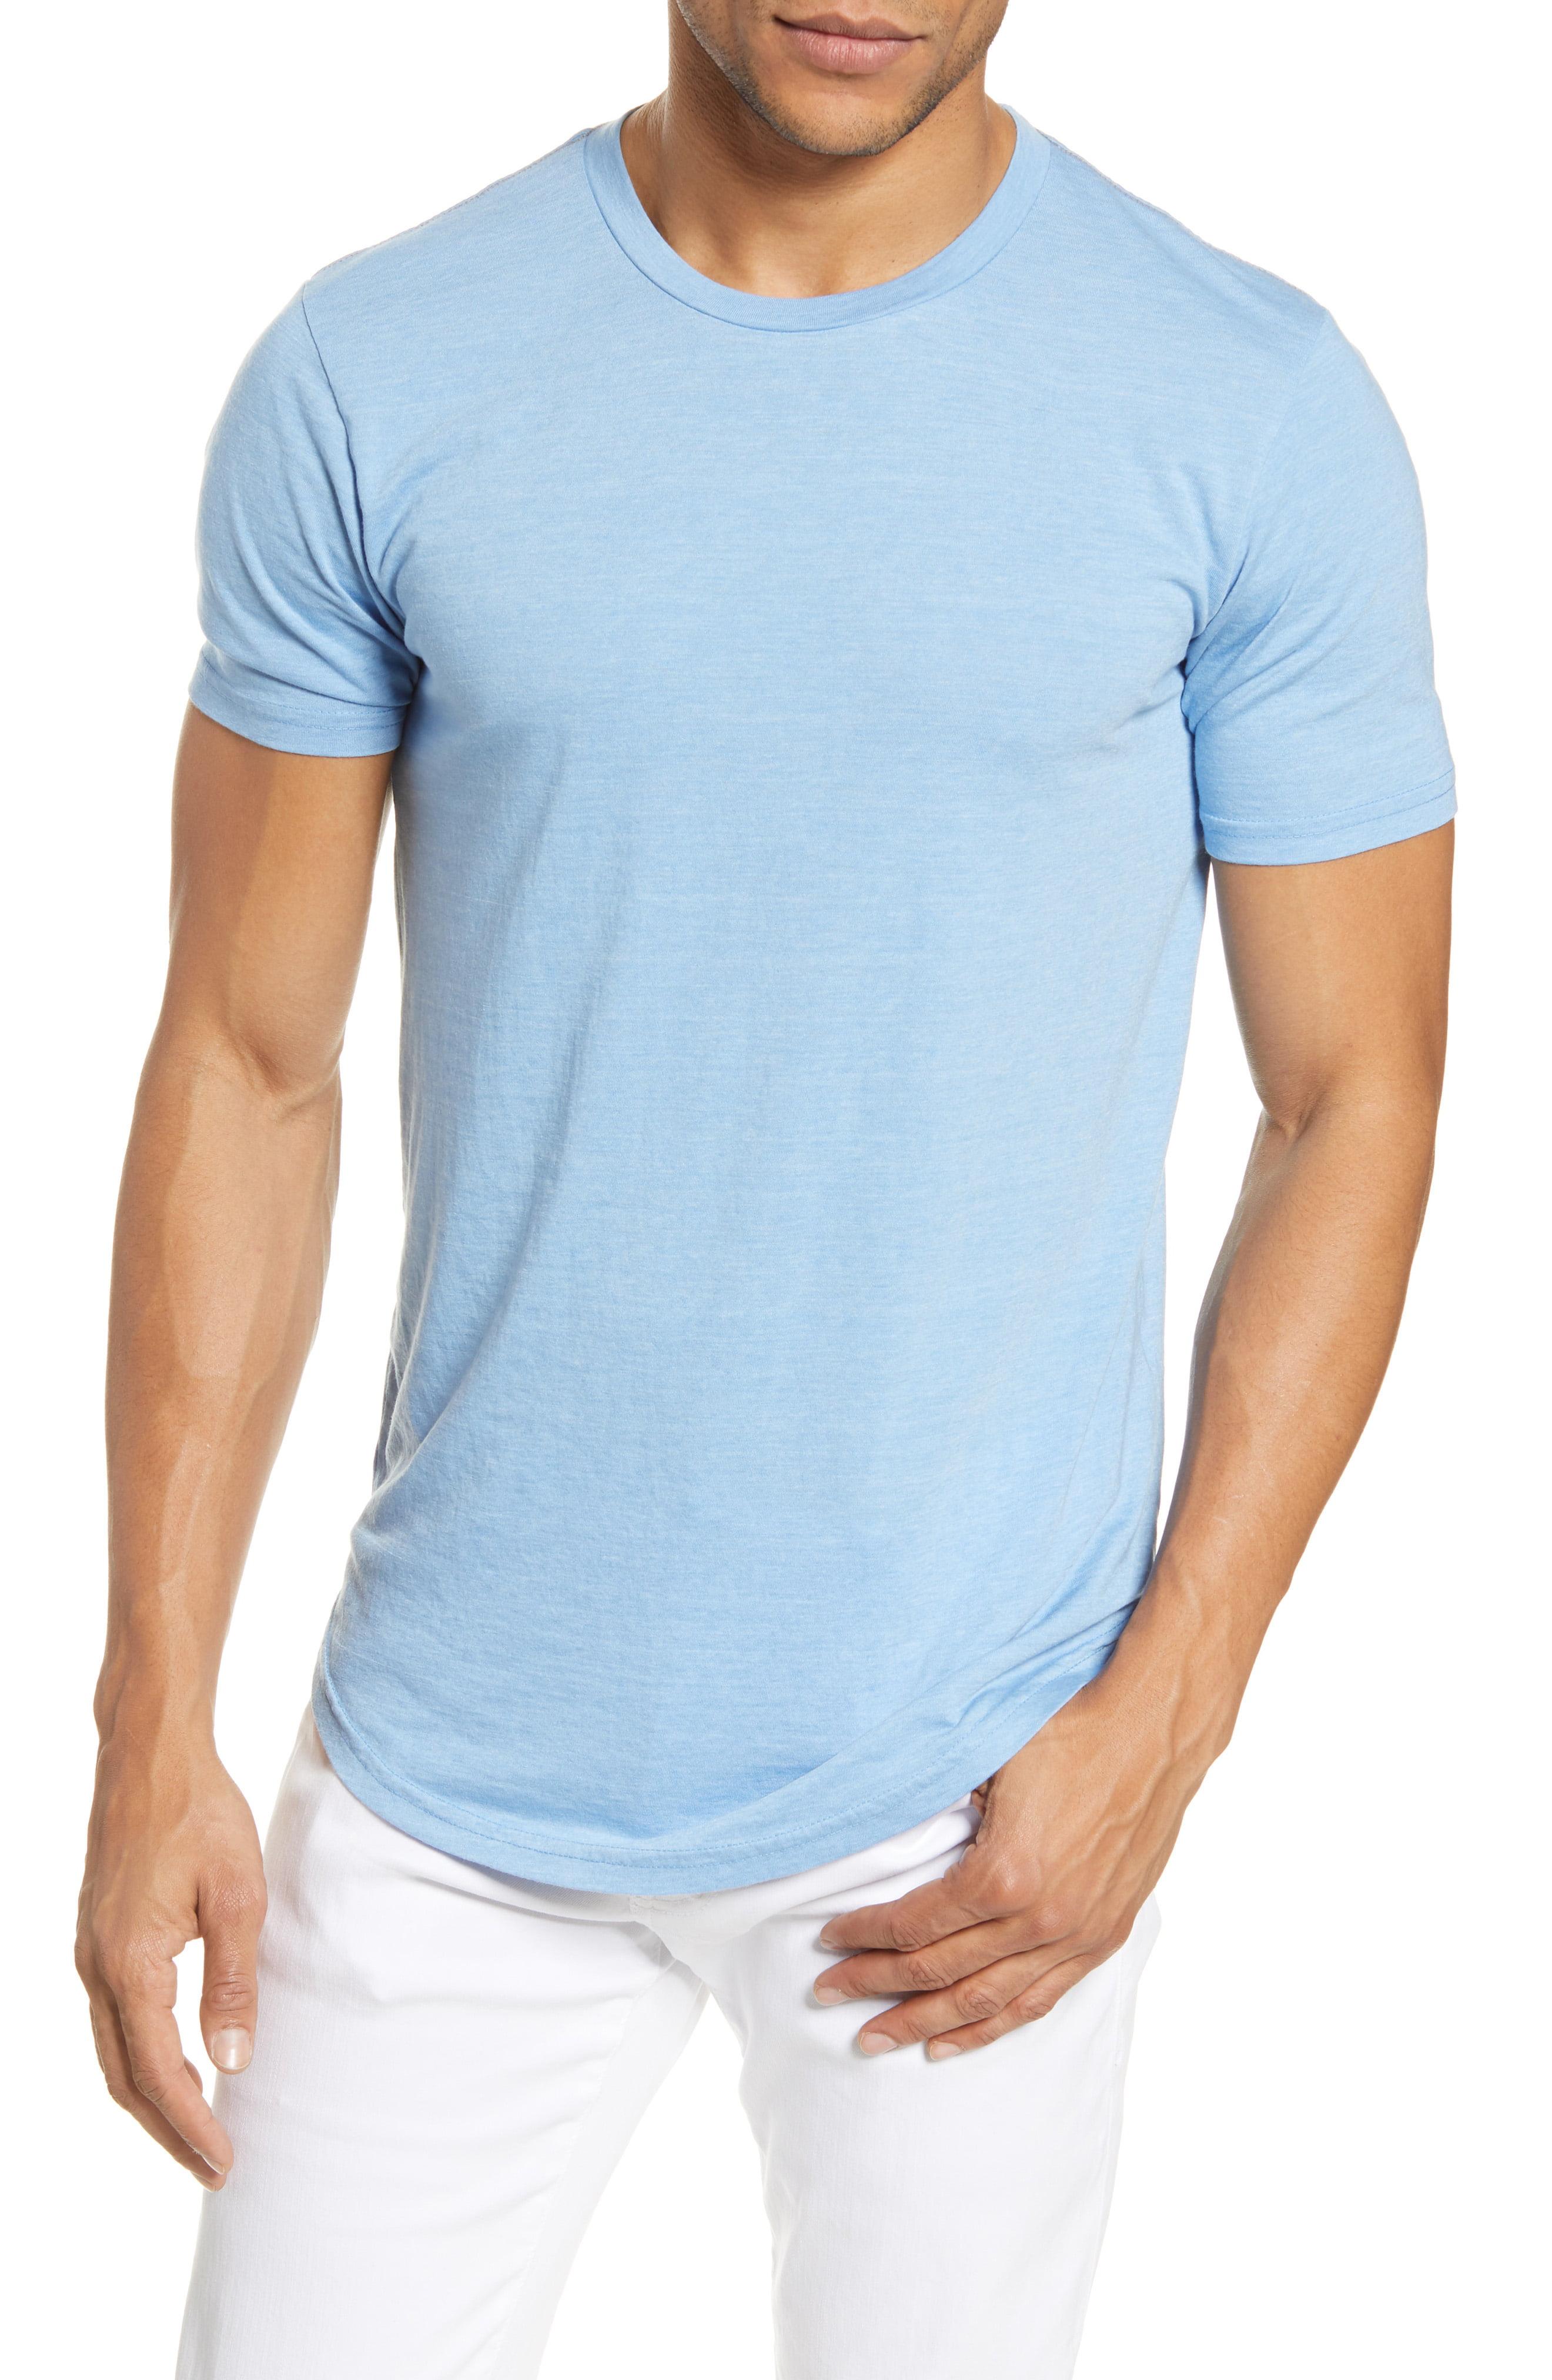 Goodlife Triblend Scallop Crewneck T-shirt in Blue for Men - Lyst